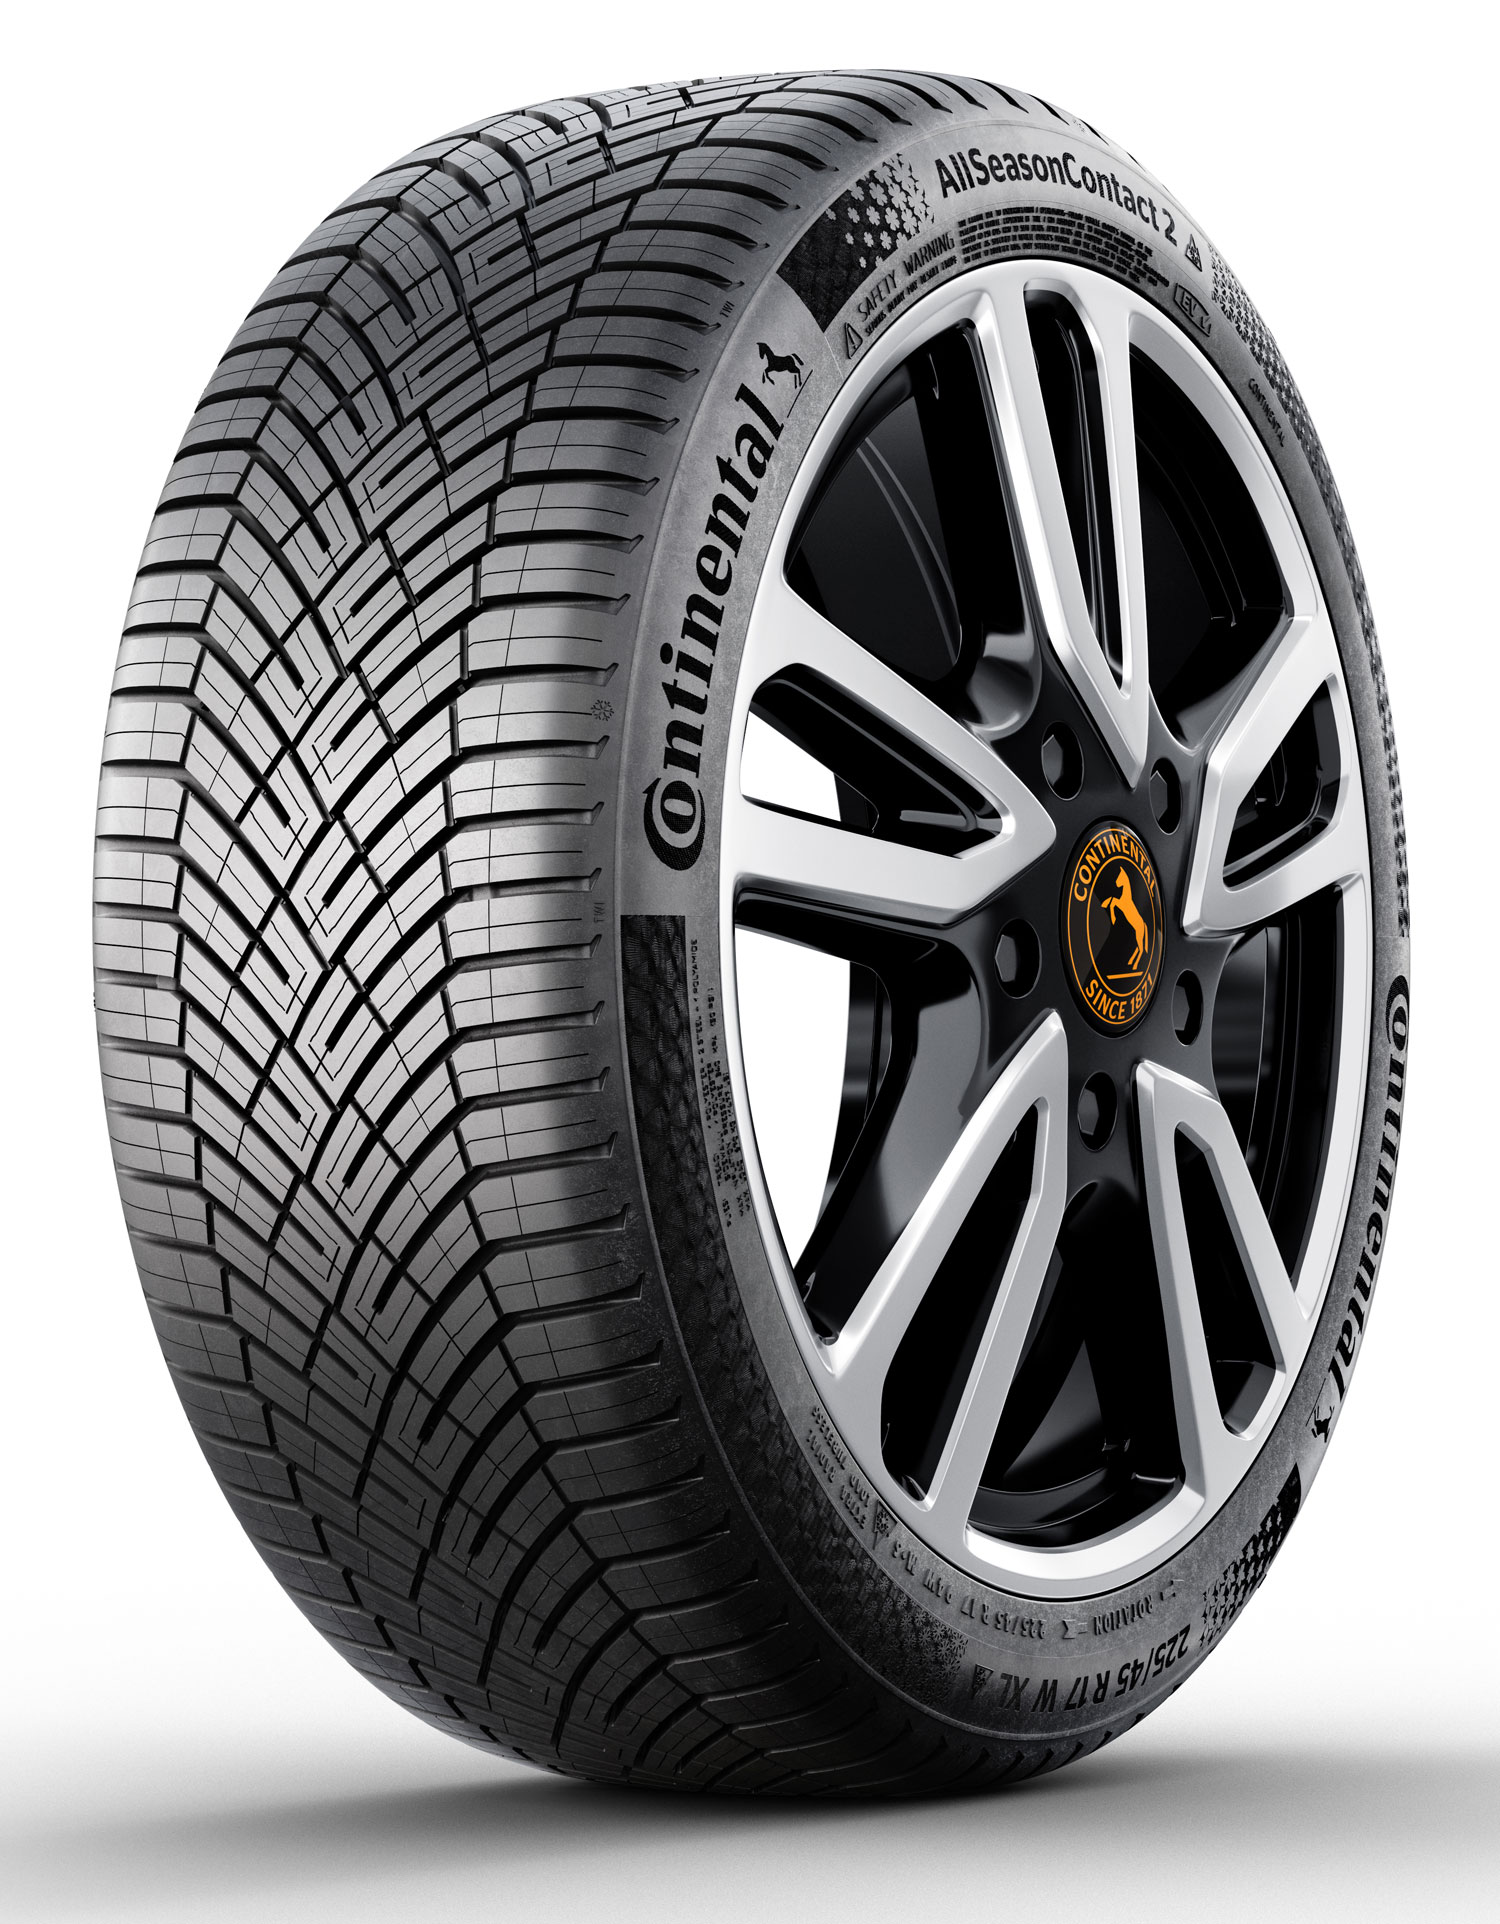 Gomme Nuove Continental 215/60 R17 96H ALLSEASONCONTACT 2 M+S pneumatici nuovi All Season